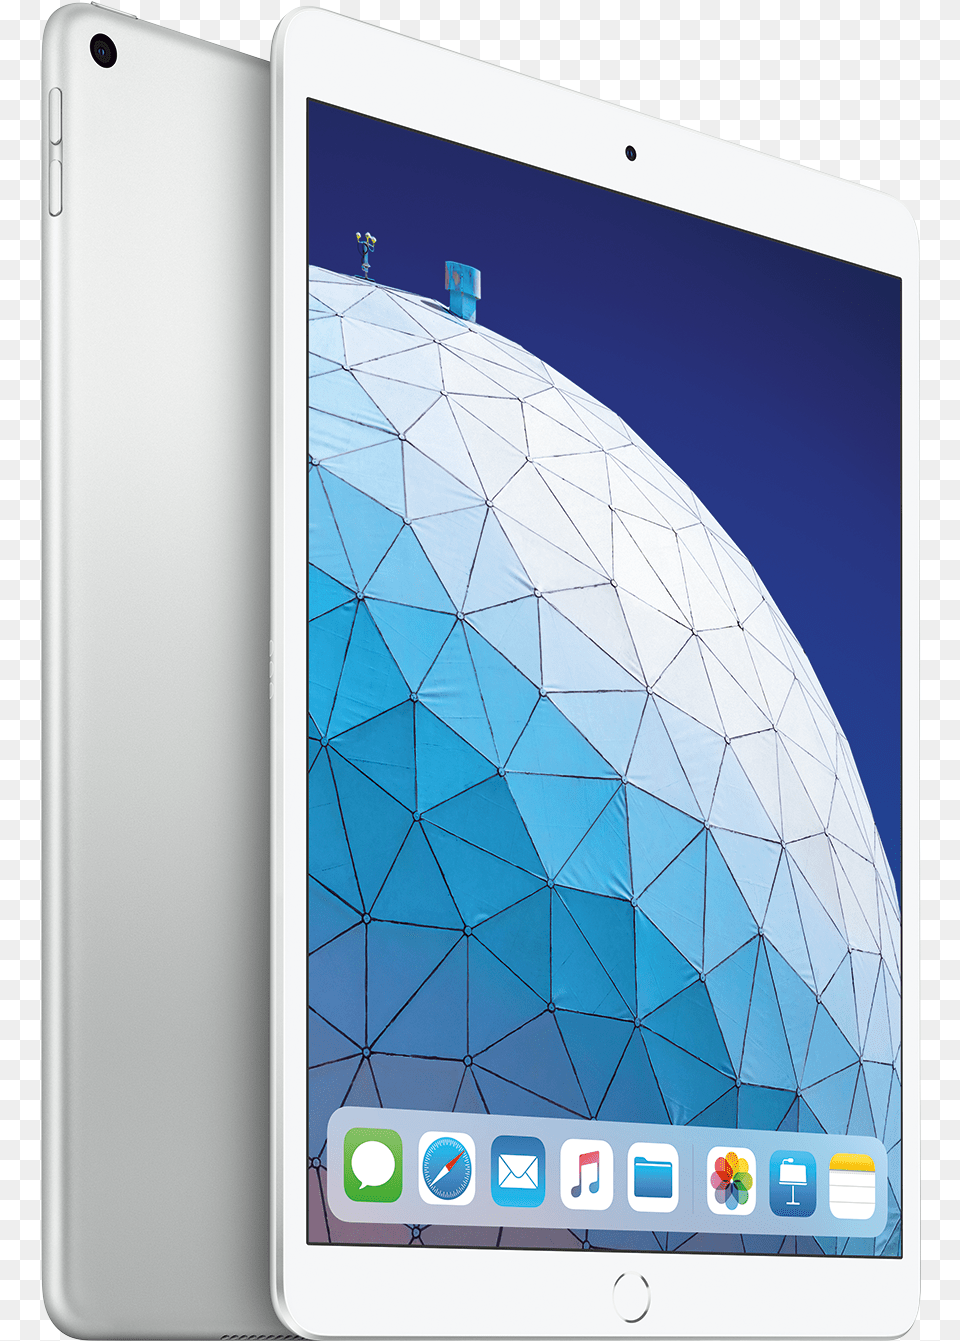 Ipad Air 3rd Generation, Computer, Electronics, Tablet Computer, Mobile Phone Png Image